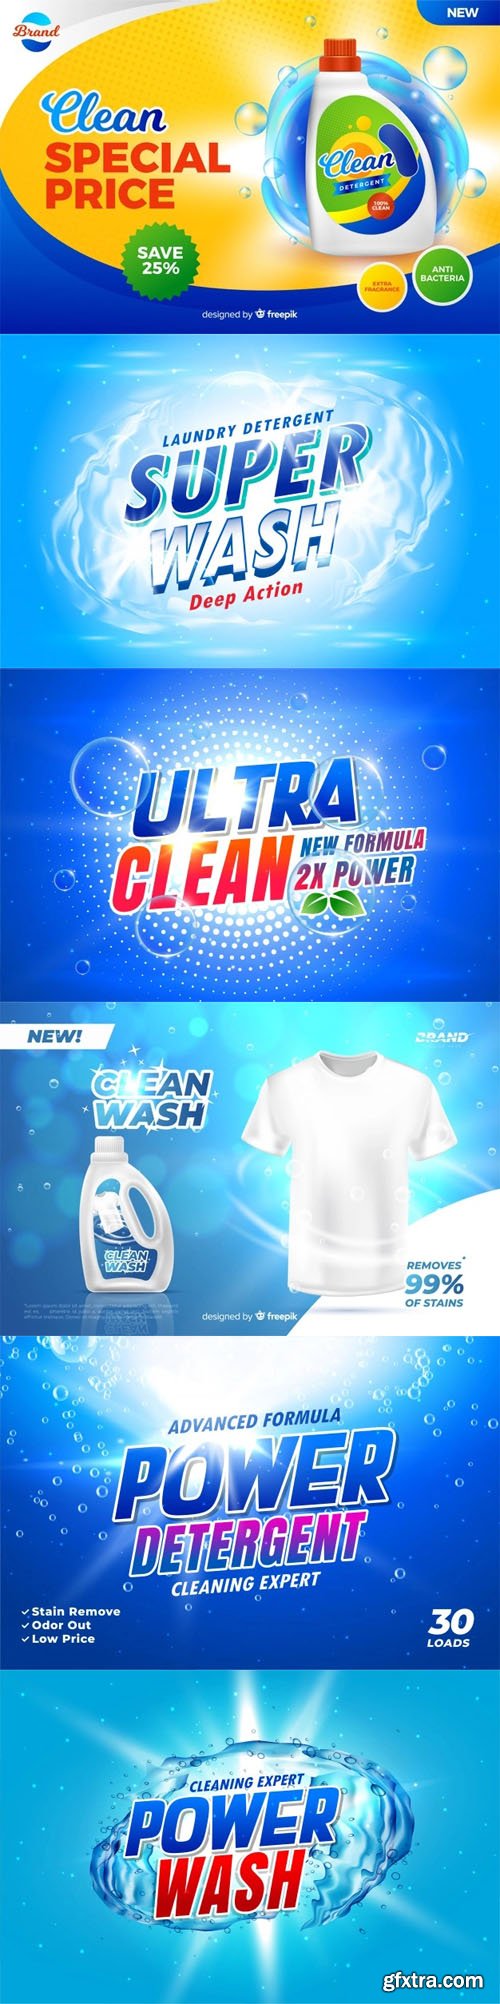 Realistic Cleaning Templates Collection in Vector